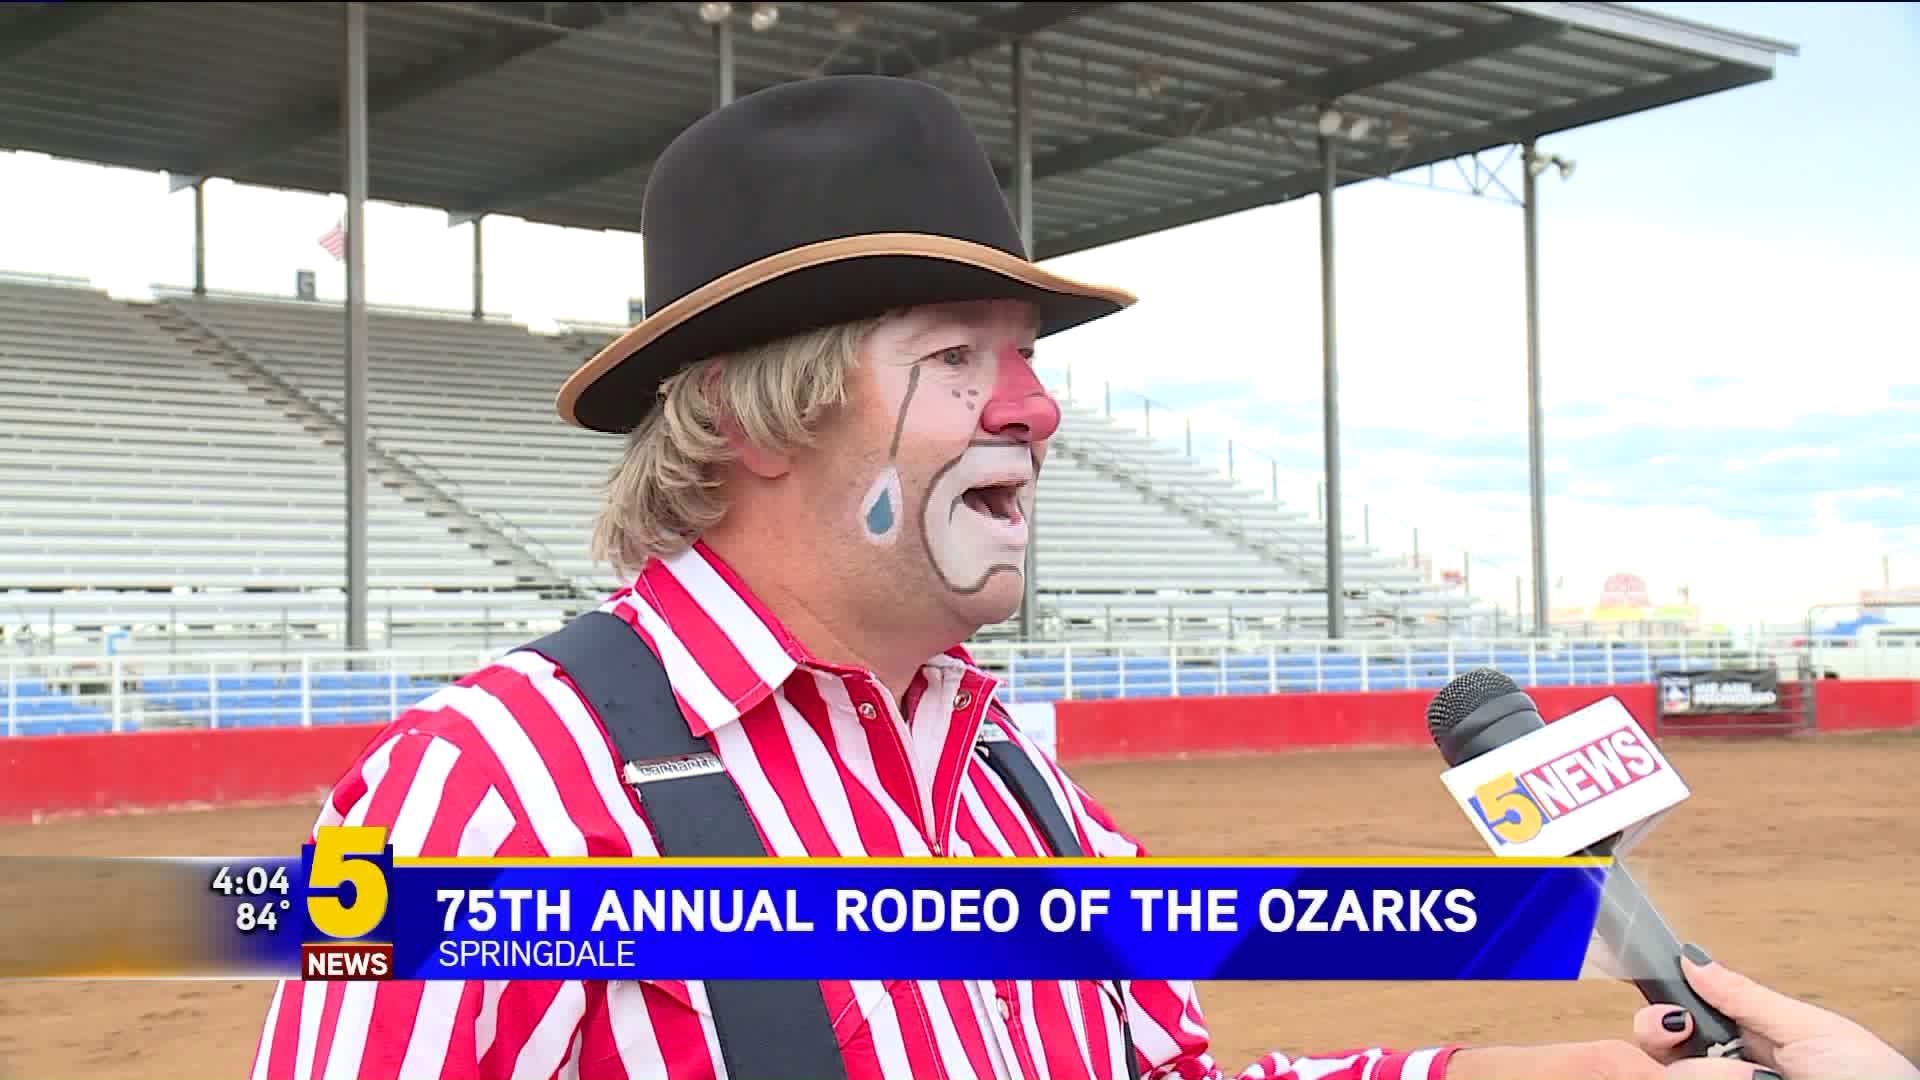 New Clown In Town For The 75th Annual Rodeo Of The Ozarks